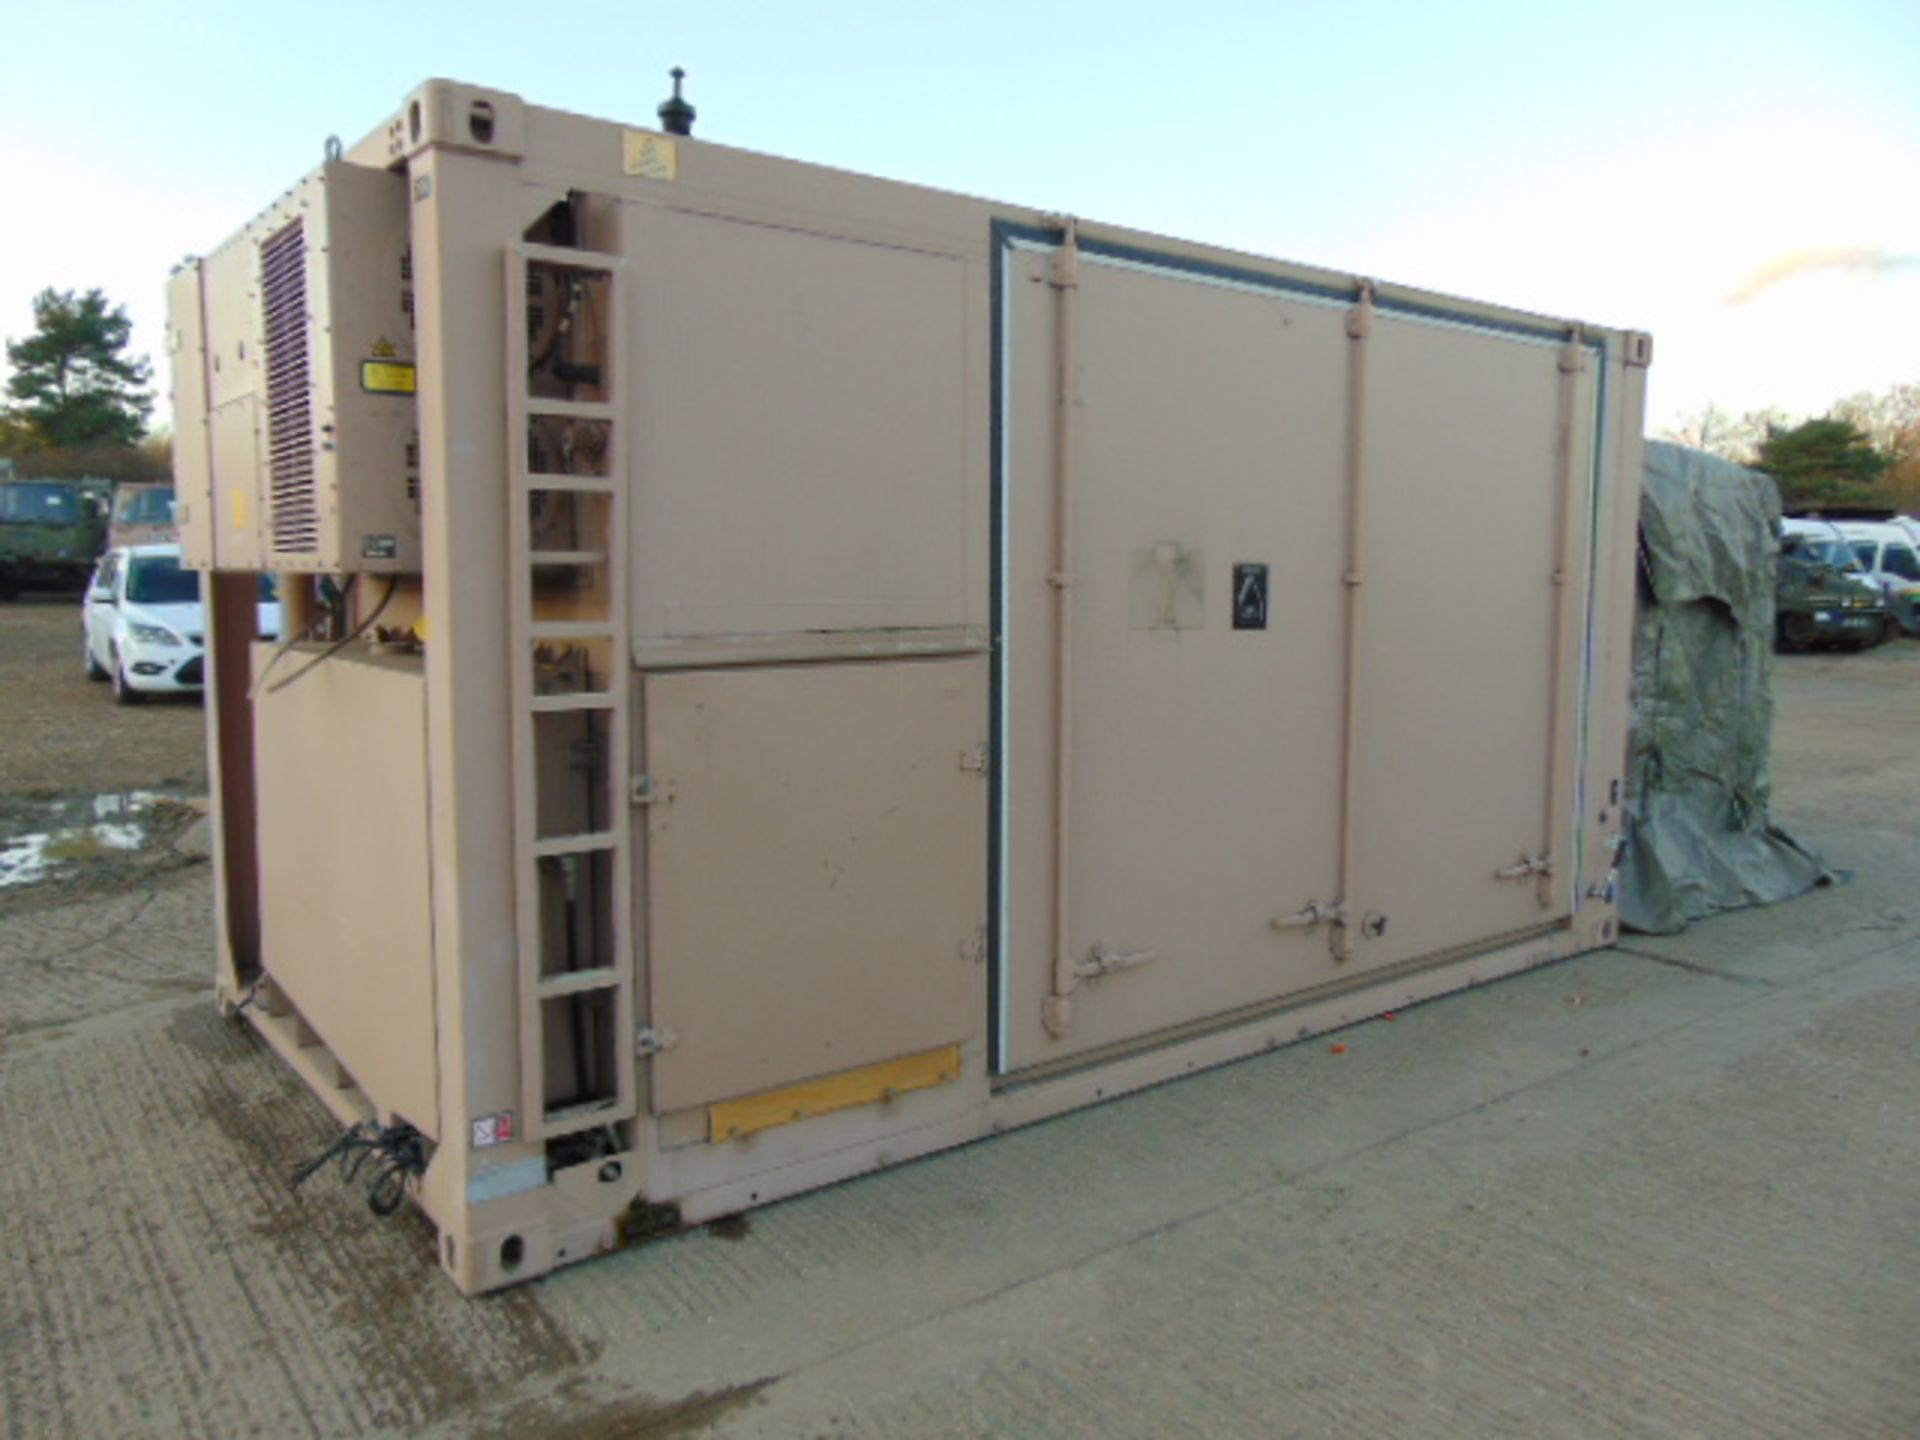 Containerised Insys Ltd Integrated Biological Detection/Decontamination System (IBDS) - Image 56 of 64